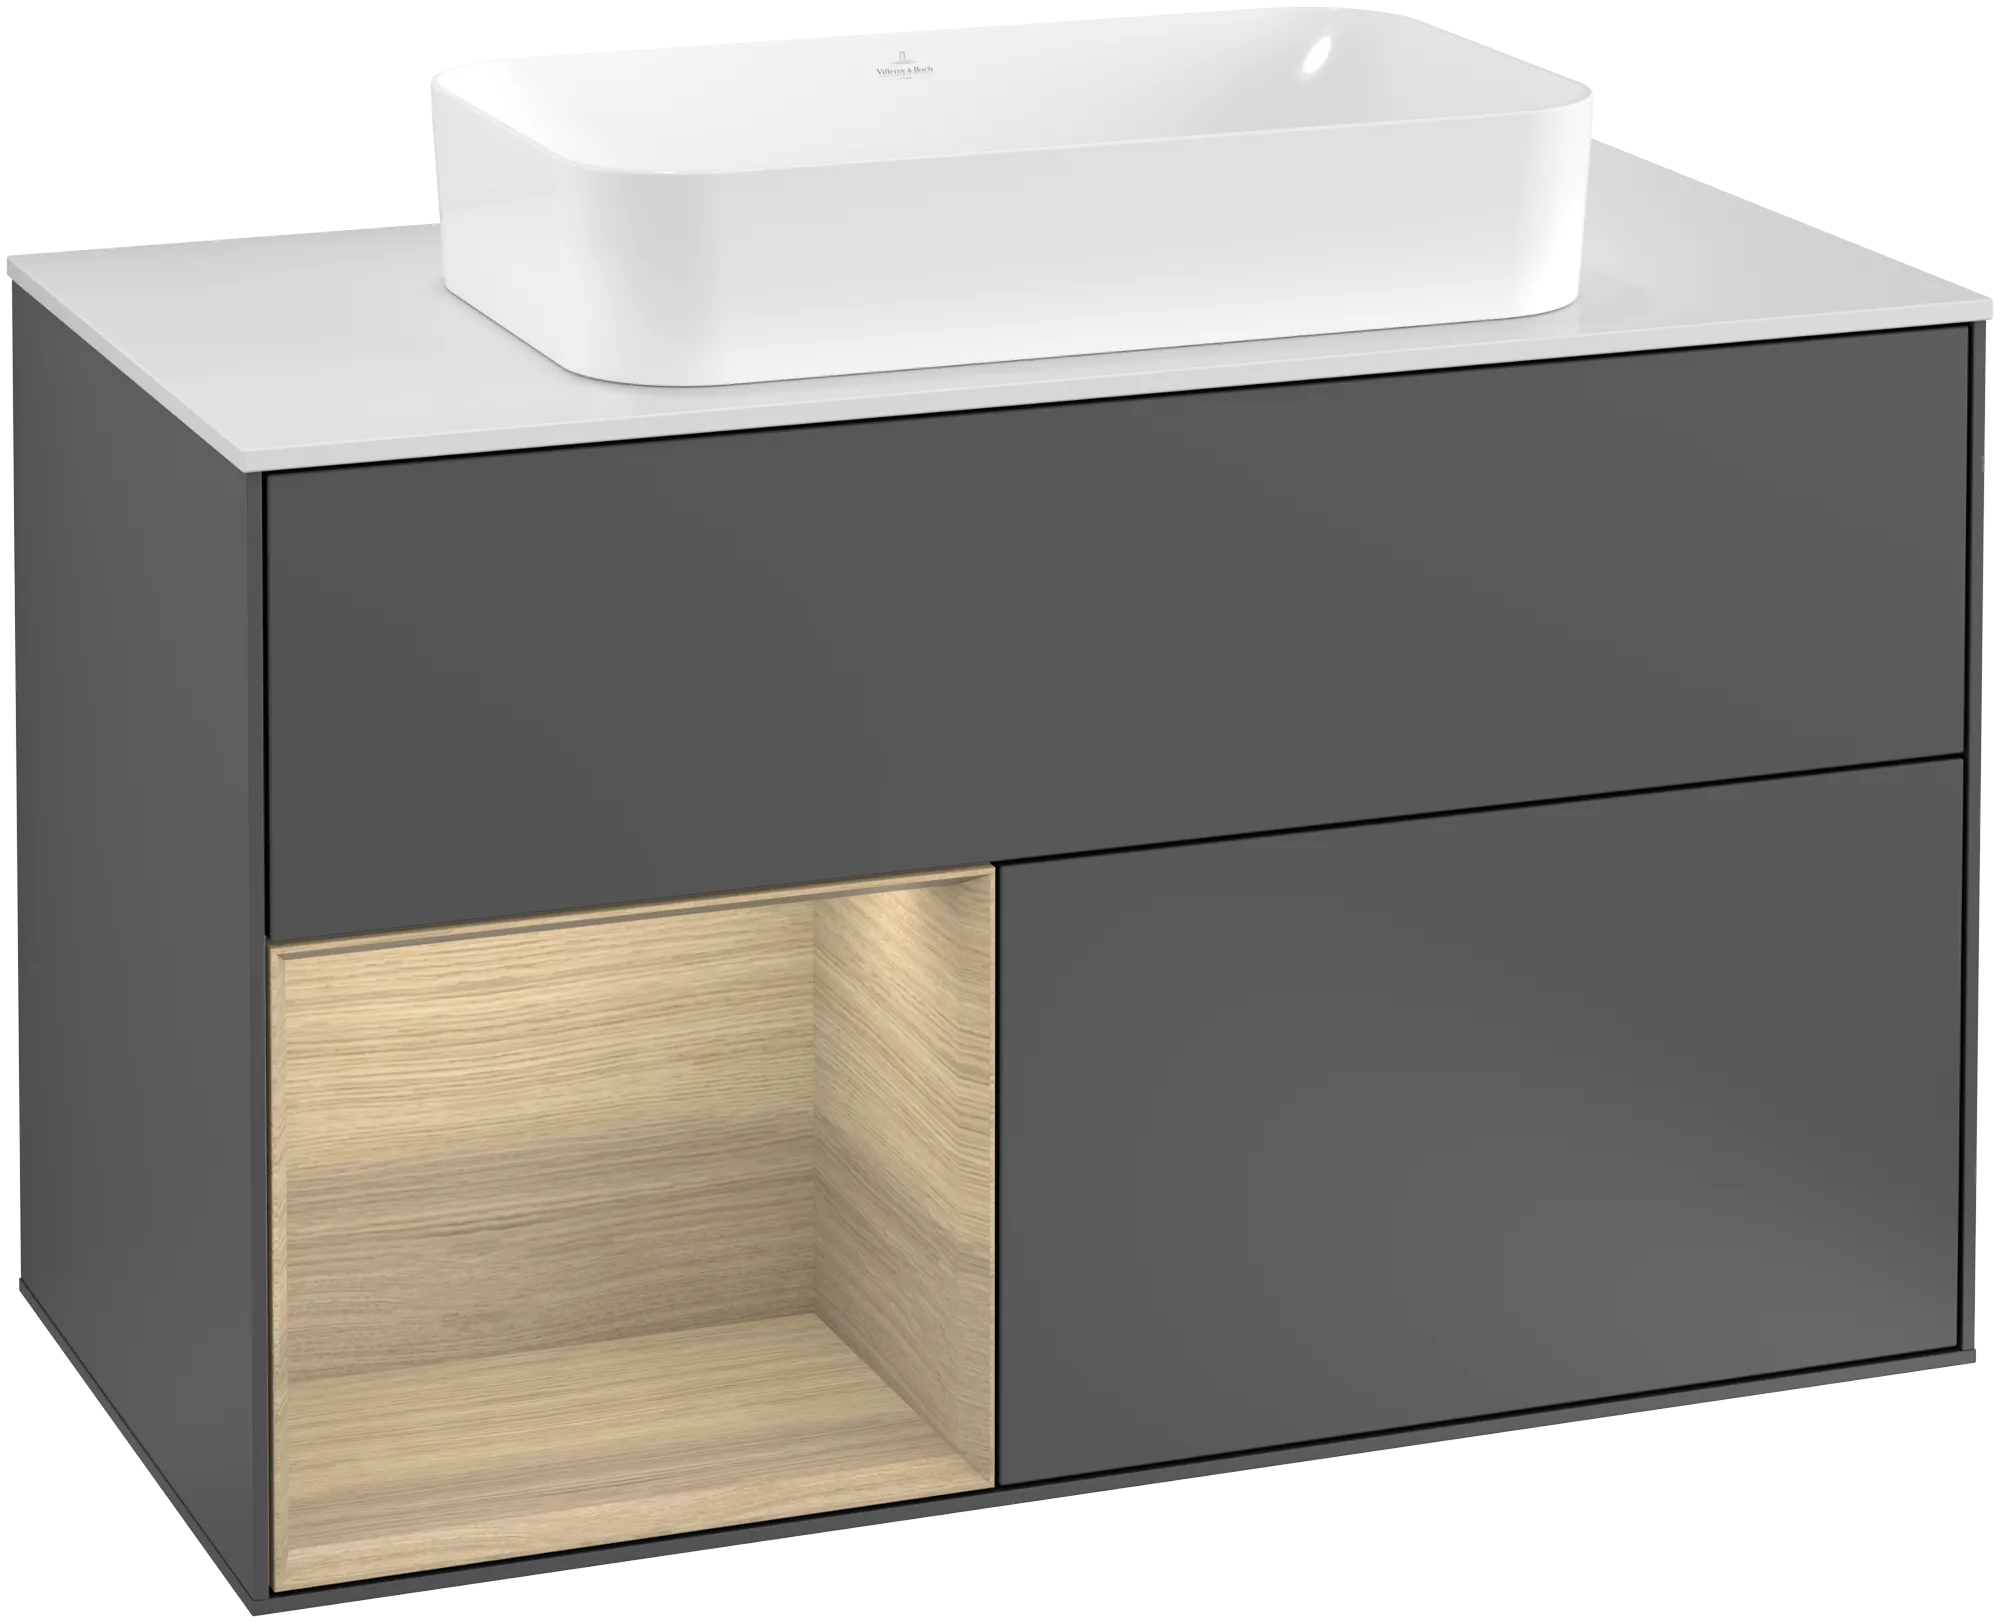 Picture of VILLEROY BOCH Finion Vanity unit, with lighting, 2 pull-out compartments, 1000 x 603 x 501 mm, Anthracite Matt Lacquer / Oak Veneer / Glass White Matt #G241PCGK